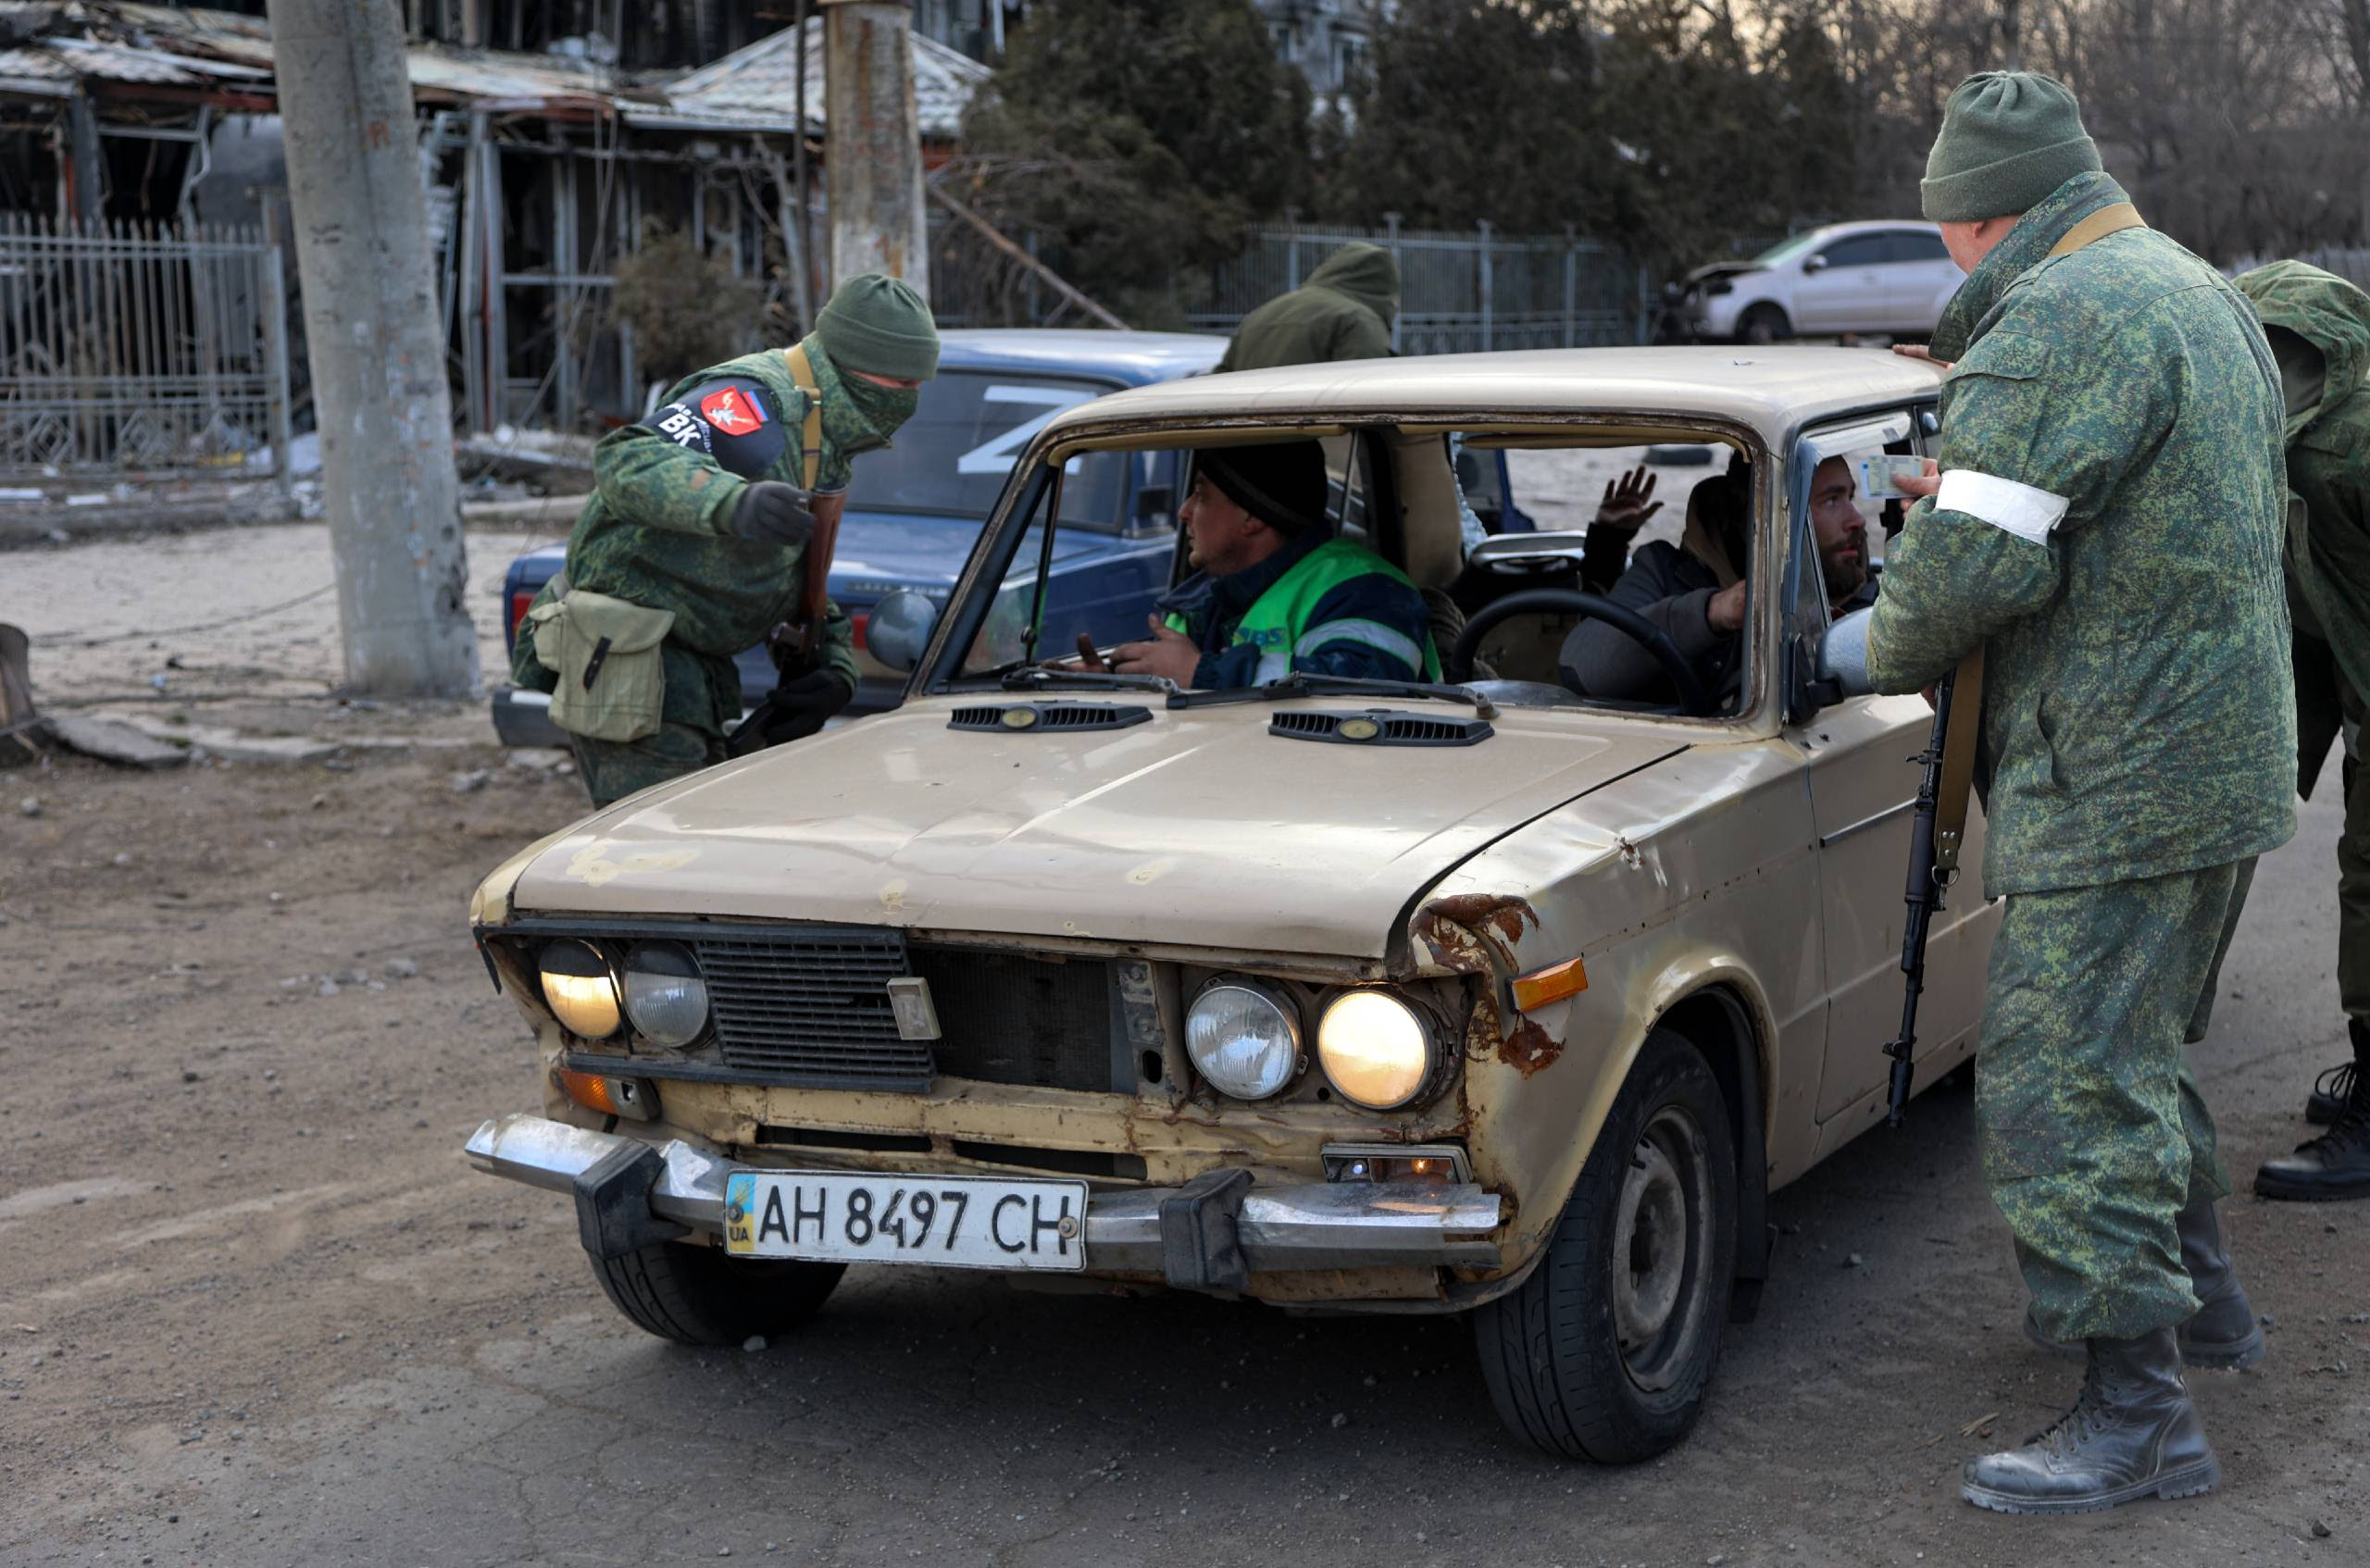 Servicemen of Donetsk People's Republic inspect a vehicle at a checkpoint on the outskirts of Mariupol, the territory which is under the Government of the Donetsk People's Republic control.